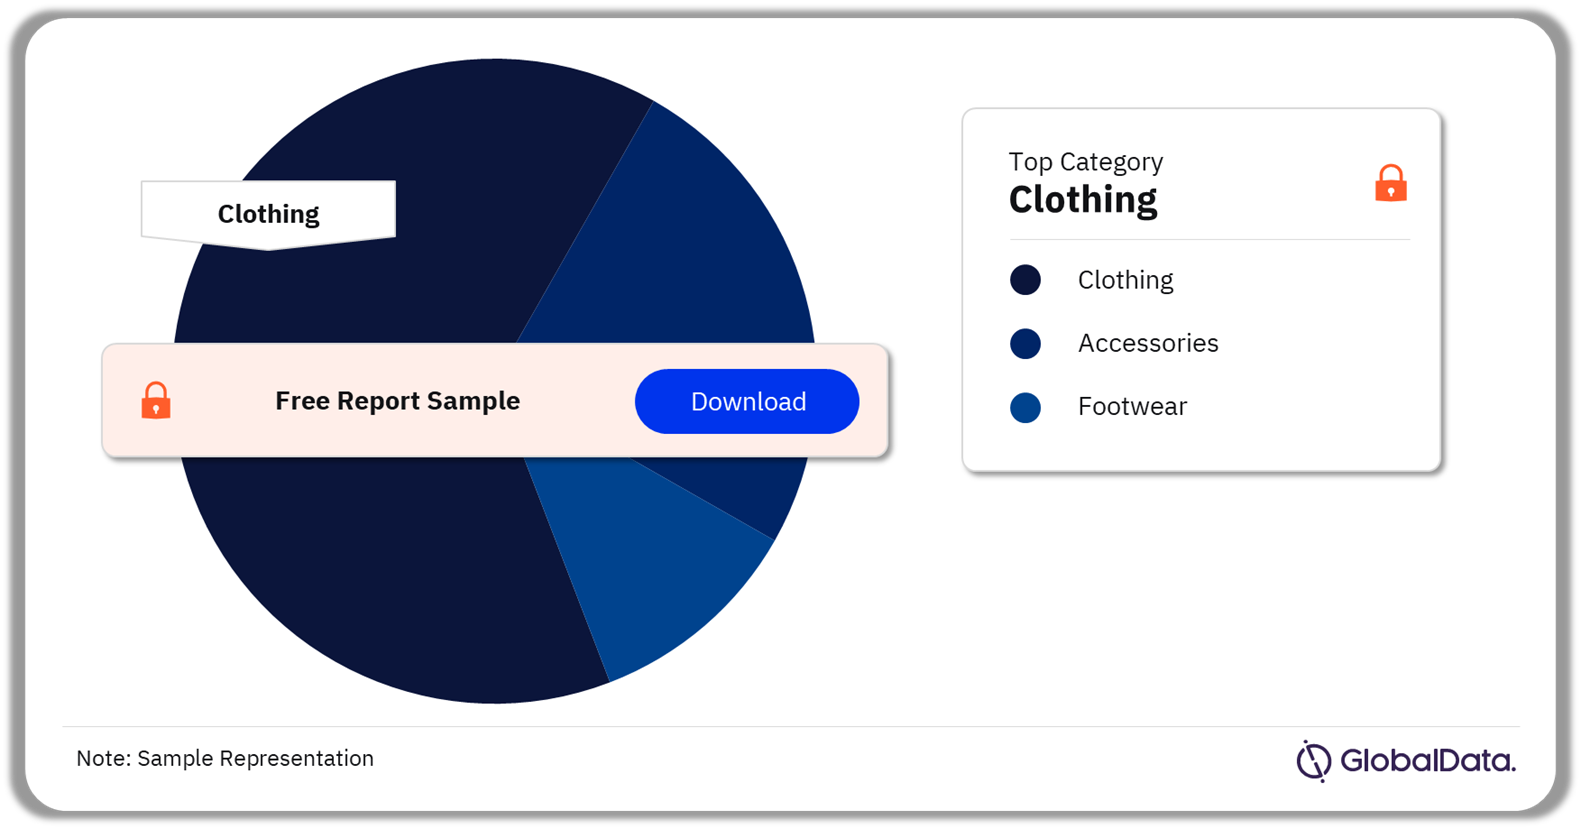 Apparel Resale Market Analysis, by Categories, 2023 (%)